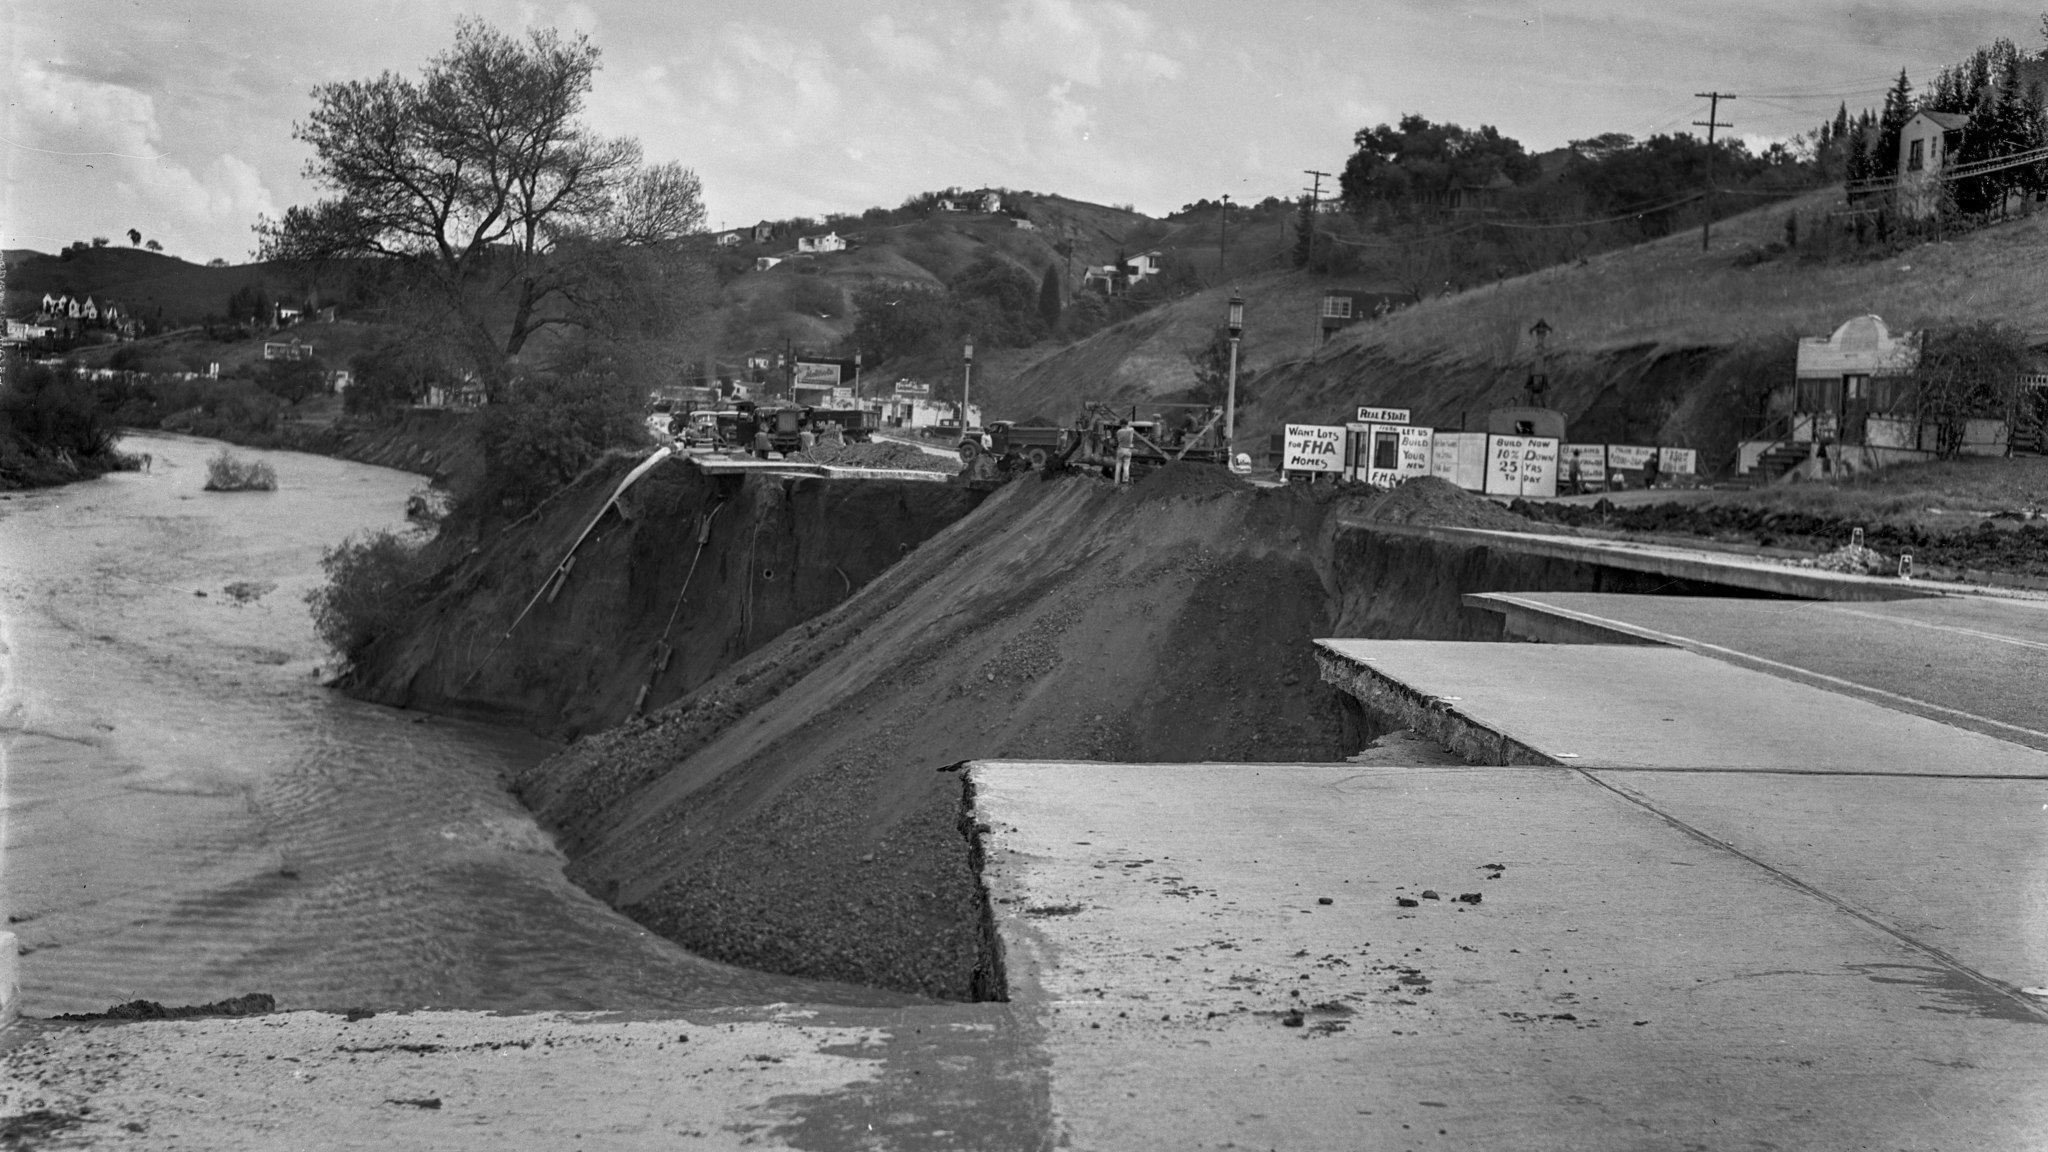 March 7, 1938: Los Angeles city engineering crews fill in 300-yard section of Ventura Boulevard near